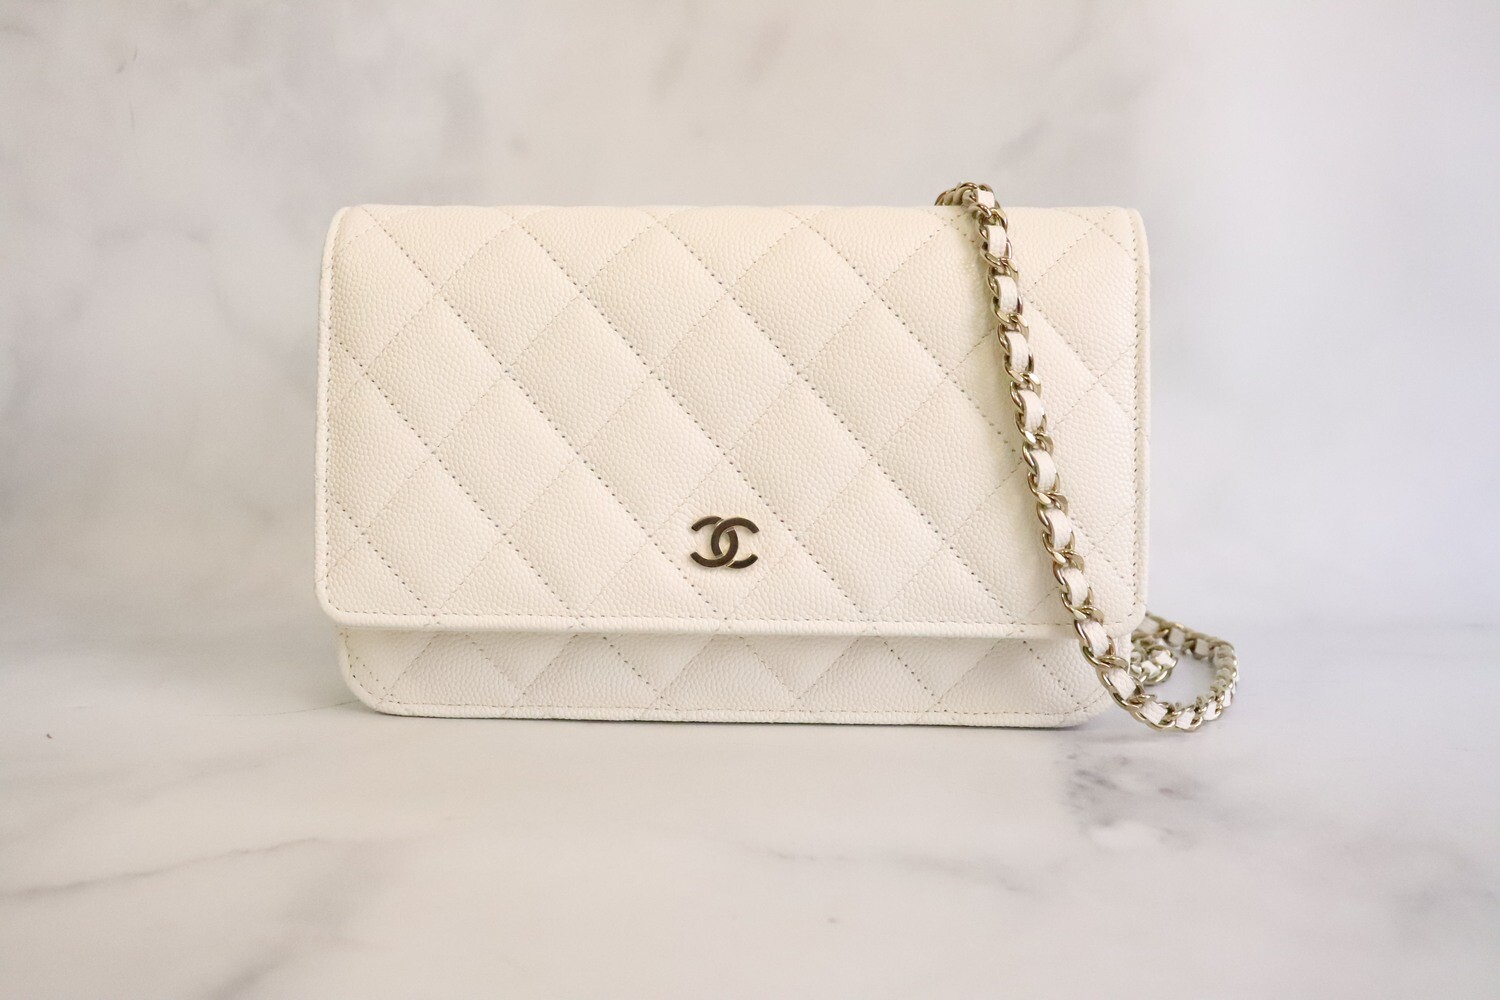 Chanel Wallet on Chain, White Caviar Leather, Gold Hardware, New